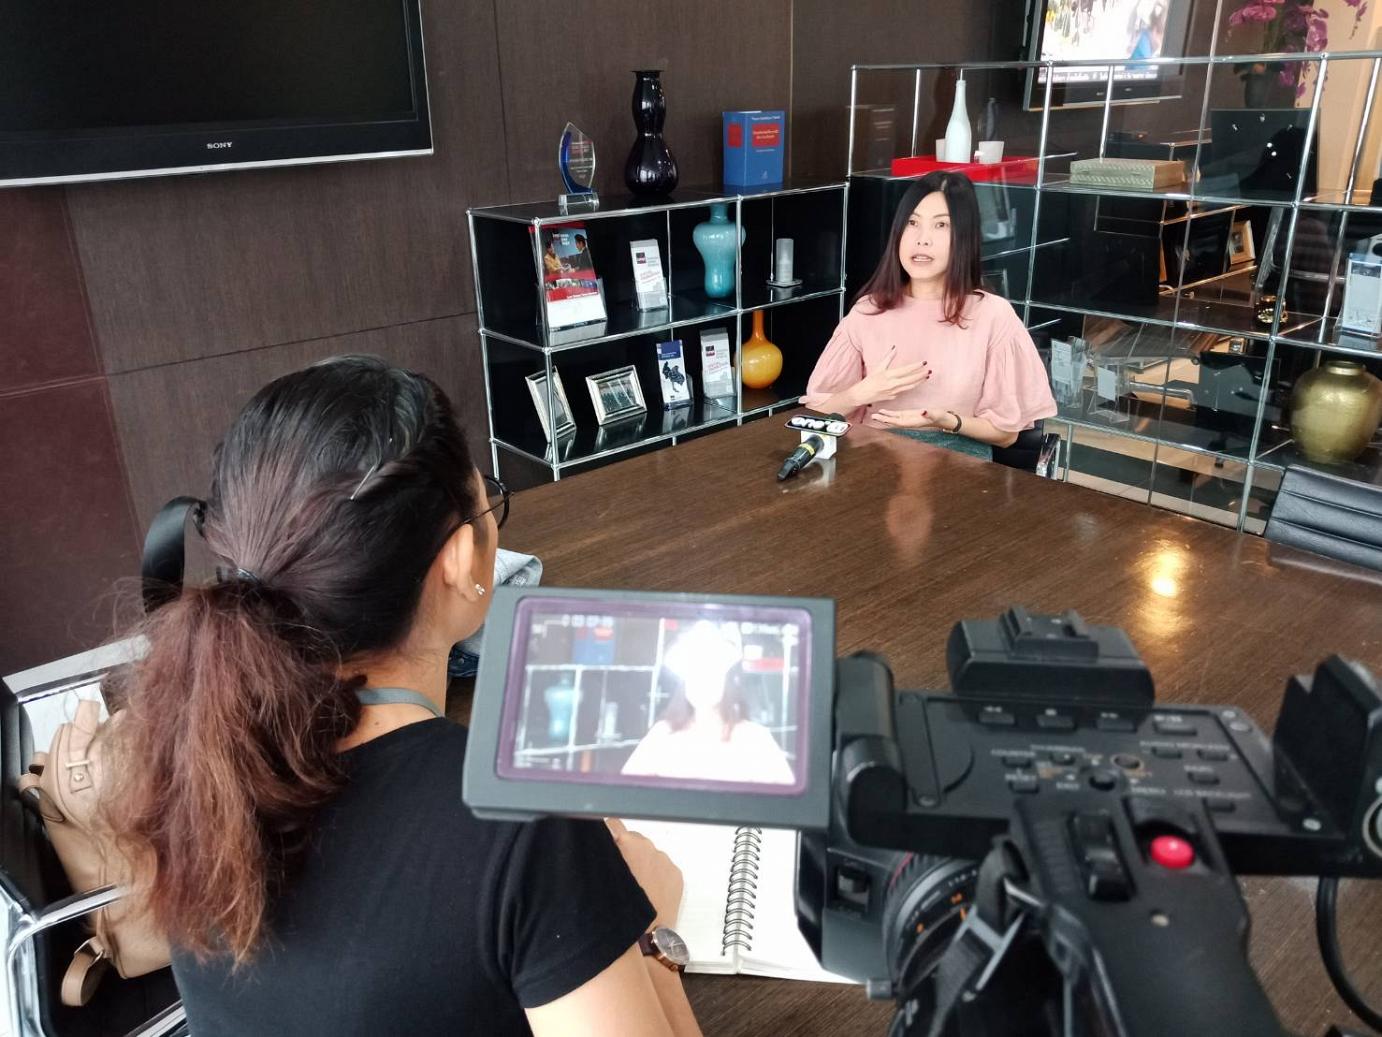 Bangkok Matching Dating and Matchmaking Service gave interview to One 31 News about Facebook Dating Apps